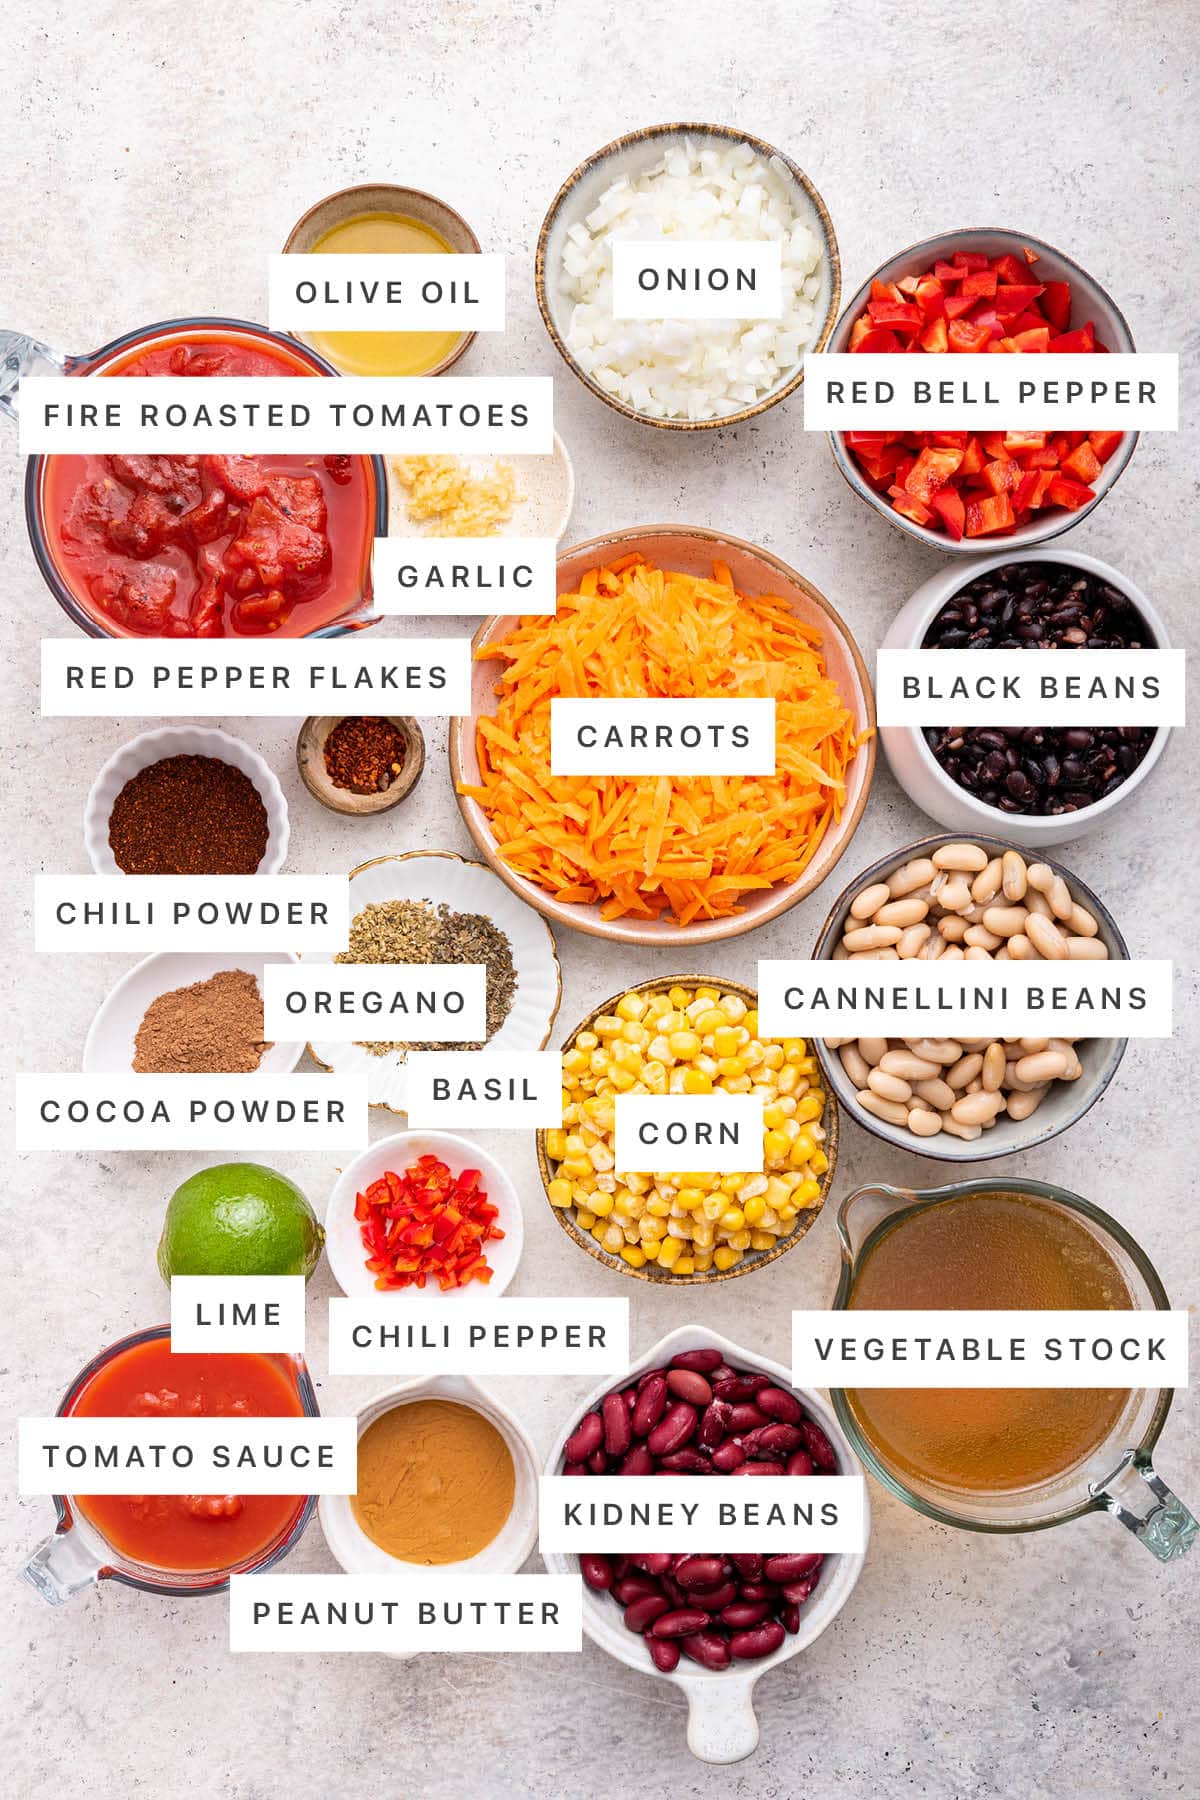 Ingredients measured out to make Easy Vegetarian Chili: fire roasted tomatoes, olive oil, onion, red bell pepper, garlic, red pepper flakes, carrots, black beans, chili powder, oregano, cocoa powder, basil, corn, cannellini beans, lime, chili pepper, tomato sauce, peanut butter, kidney beans and vegetable stock.